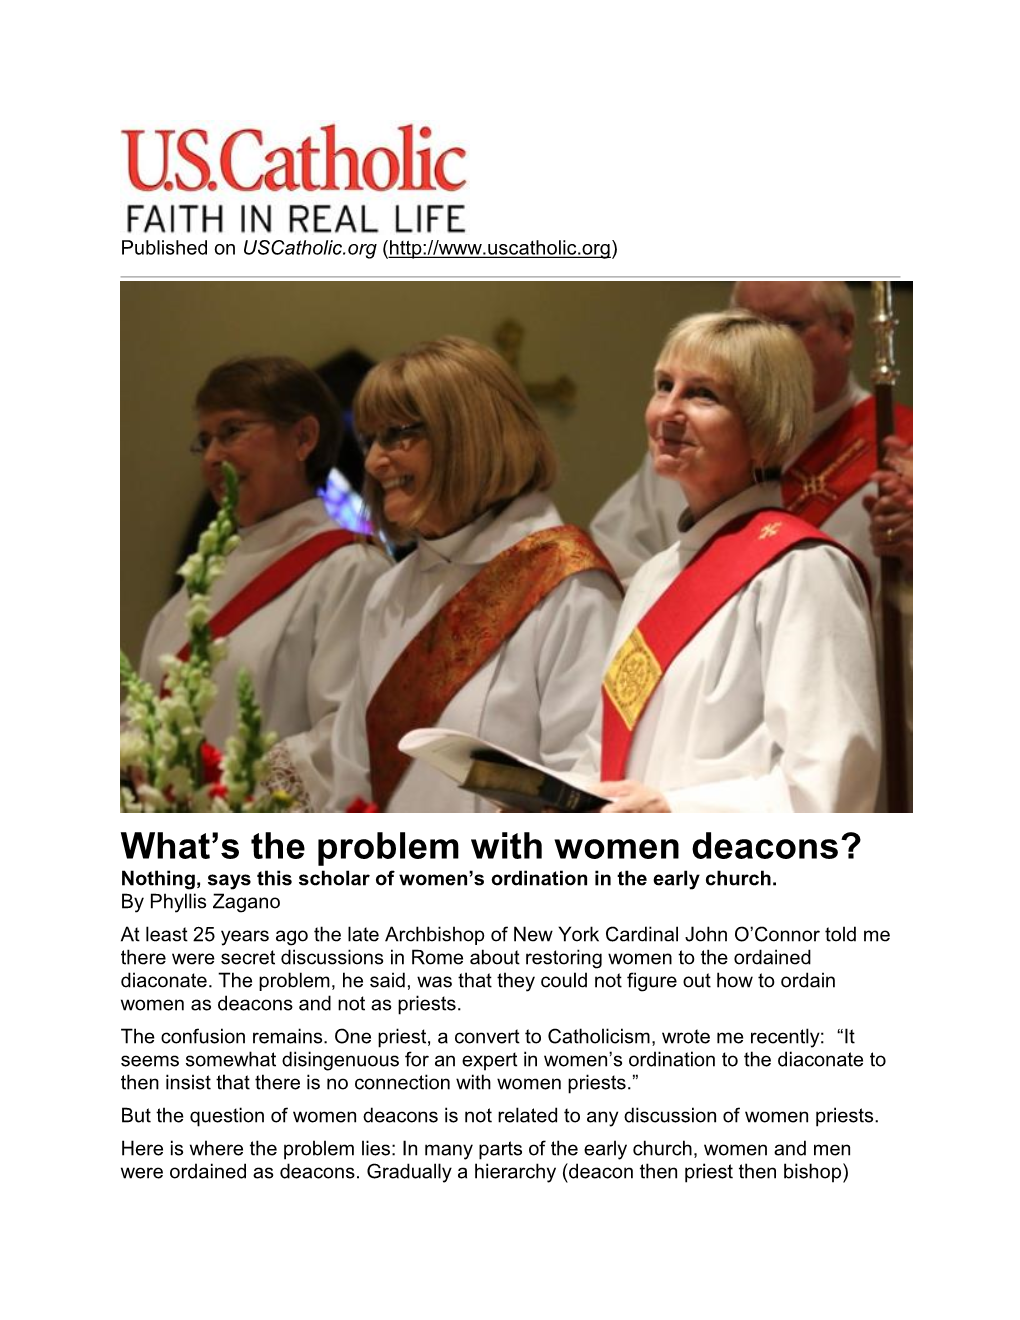 What's the Problem with Women Deacons?